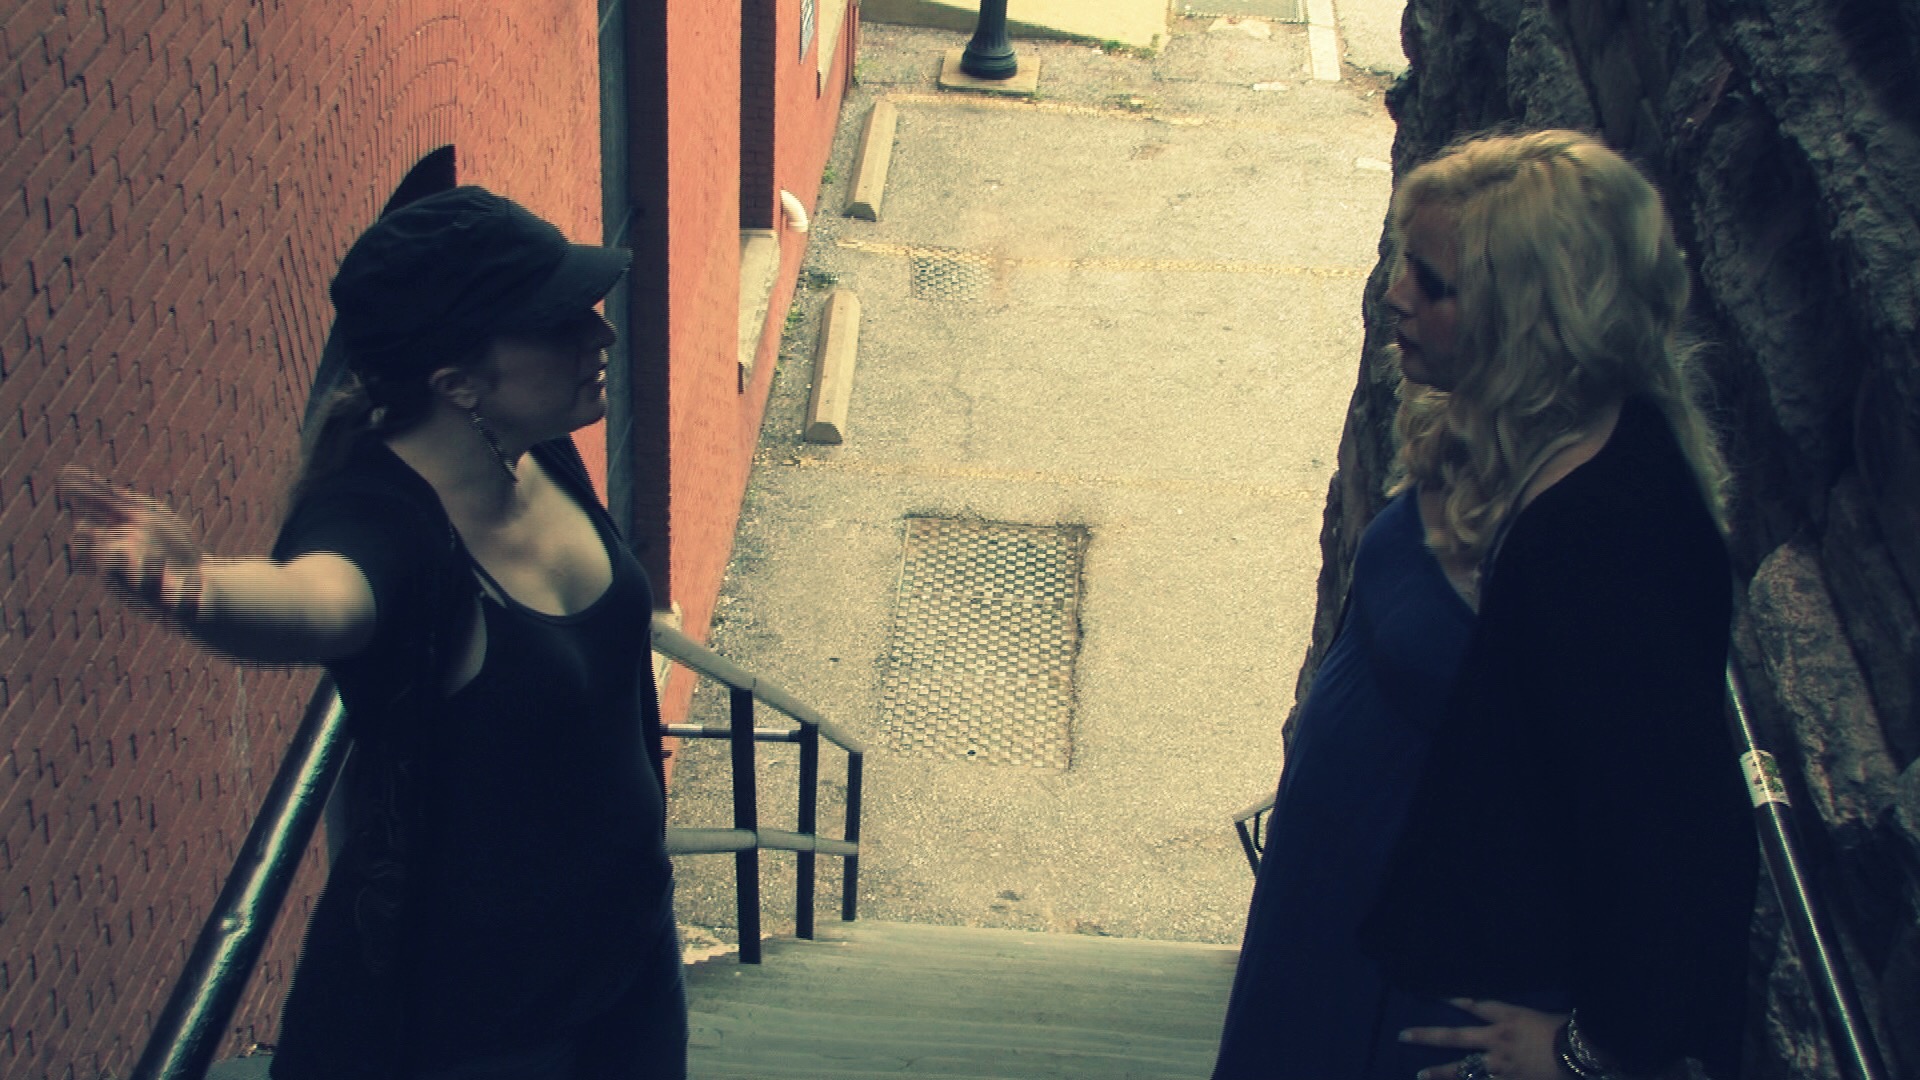 Jane, Lyd, and the Exorcist Stairs